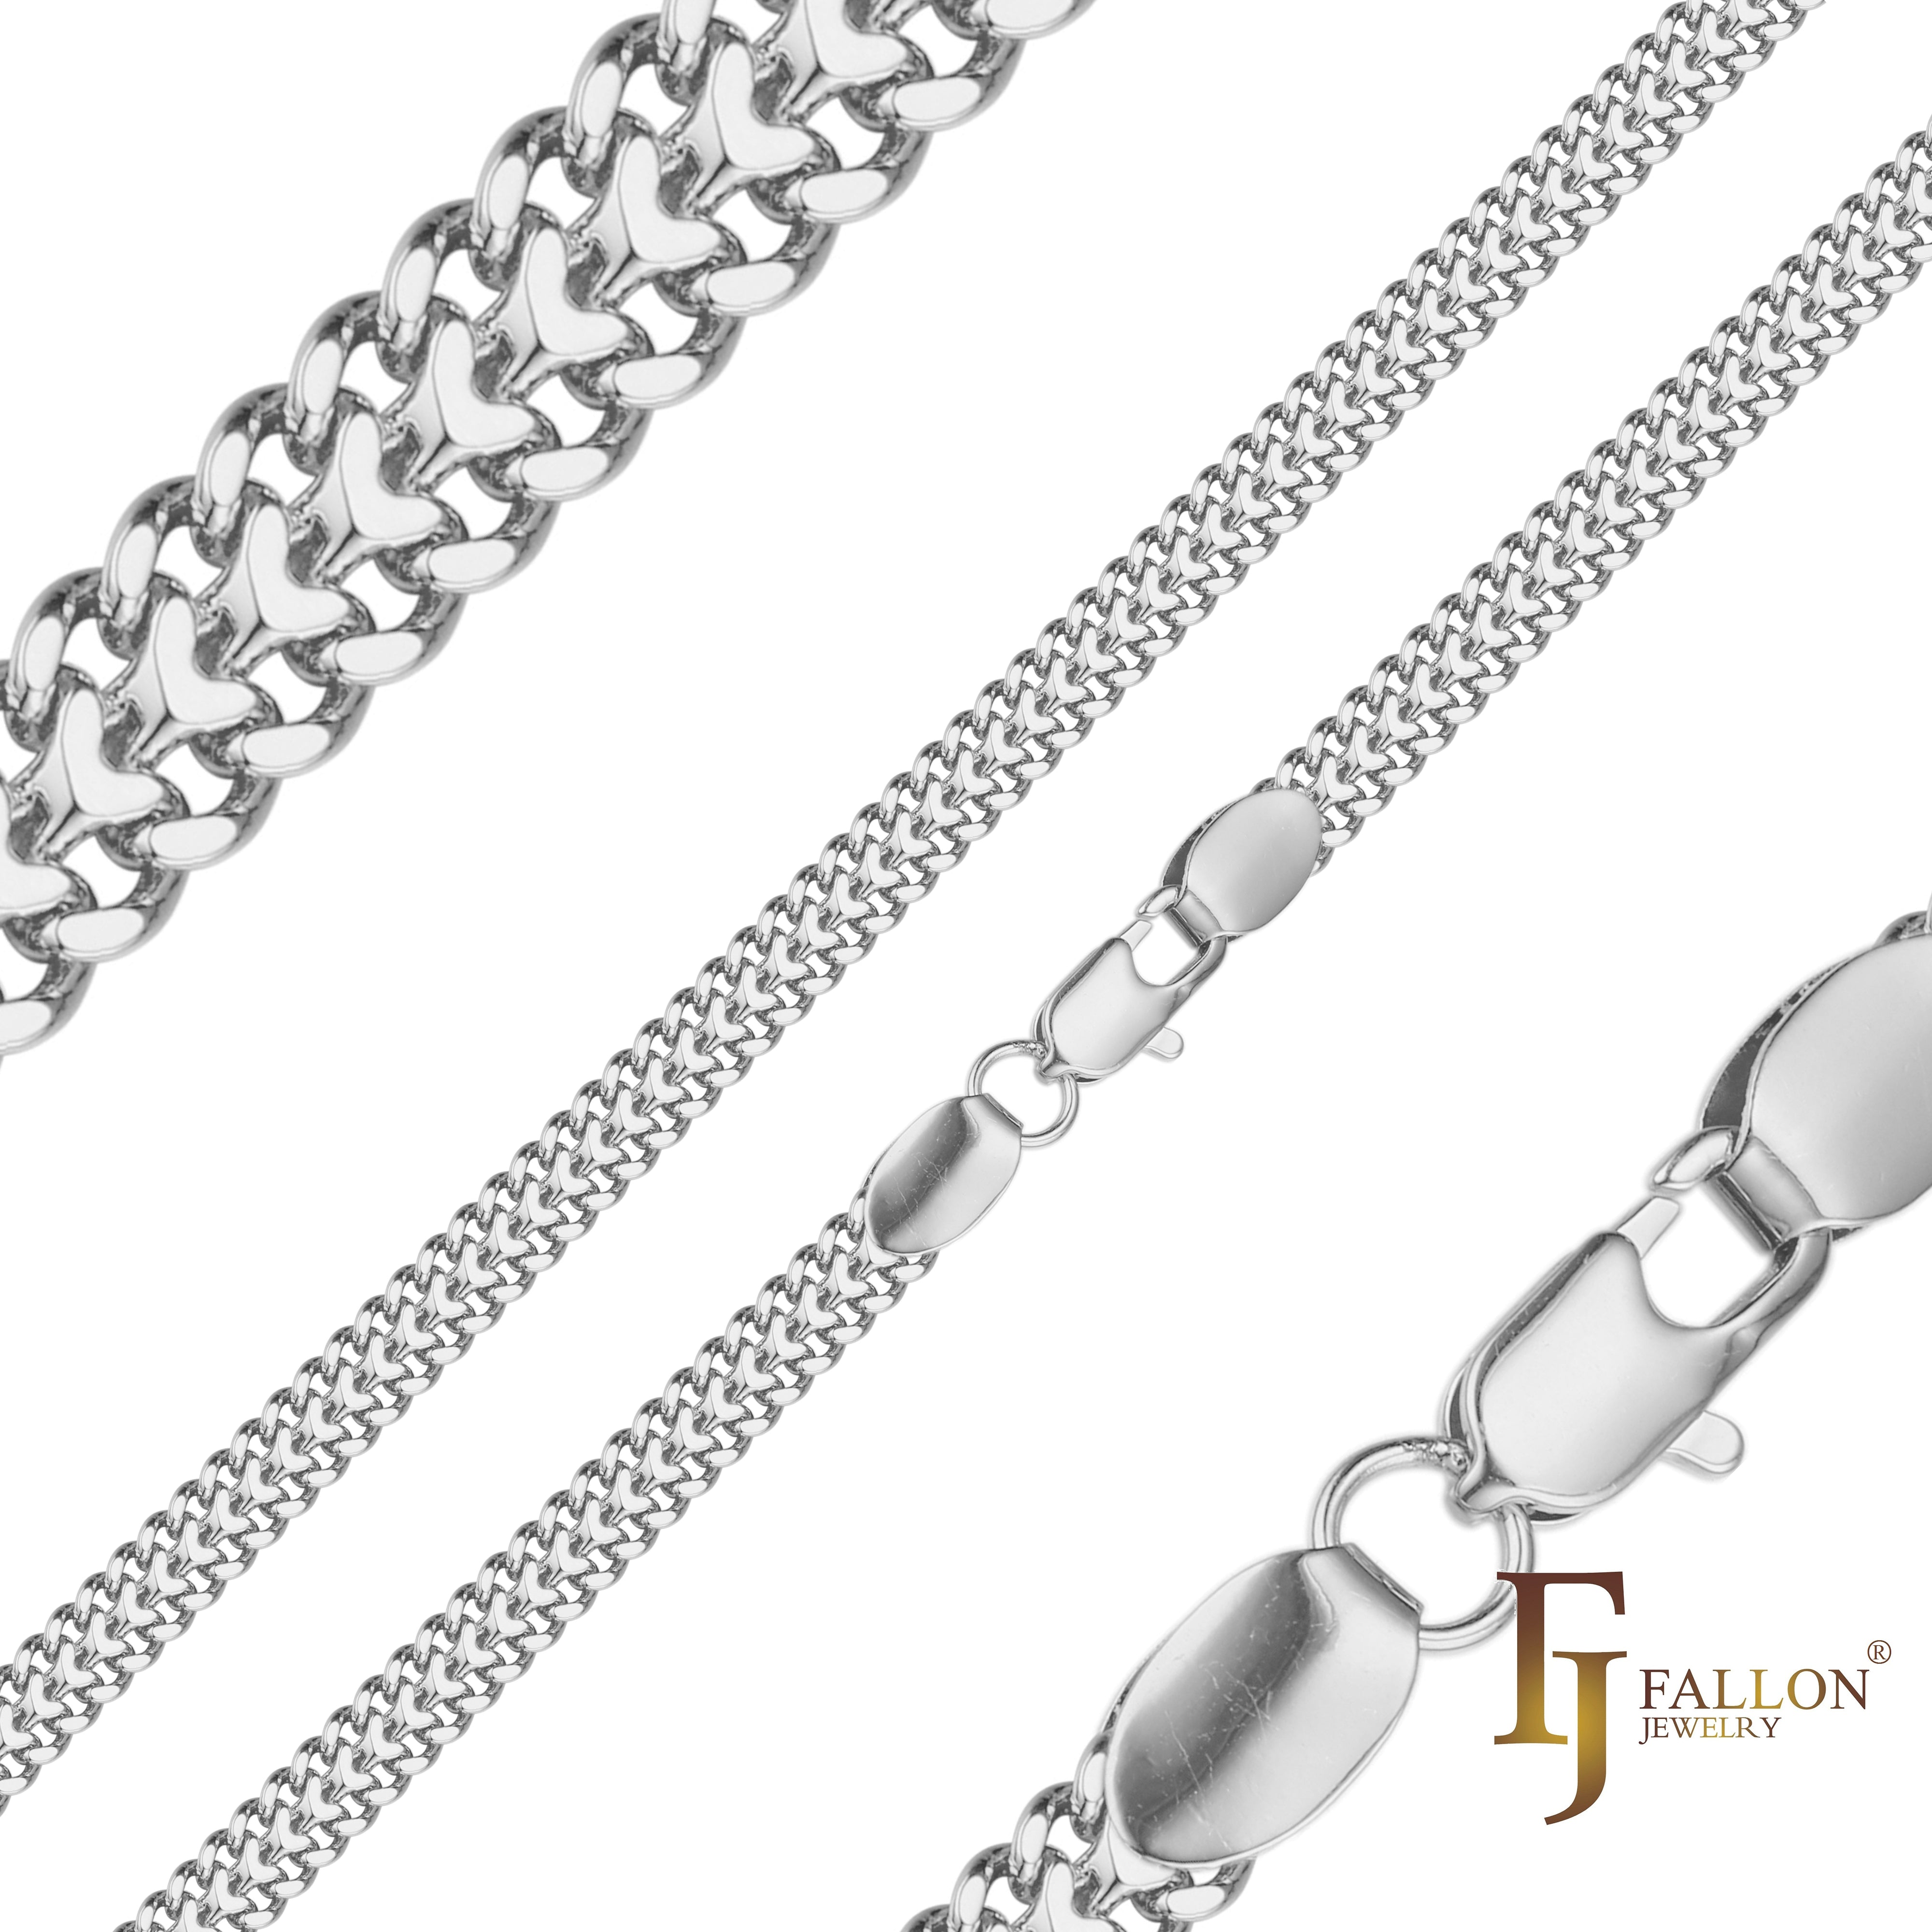 .Two-way Cuban double link chains plated in White Gold Surface flattened SF